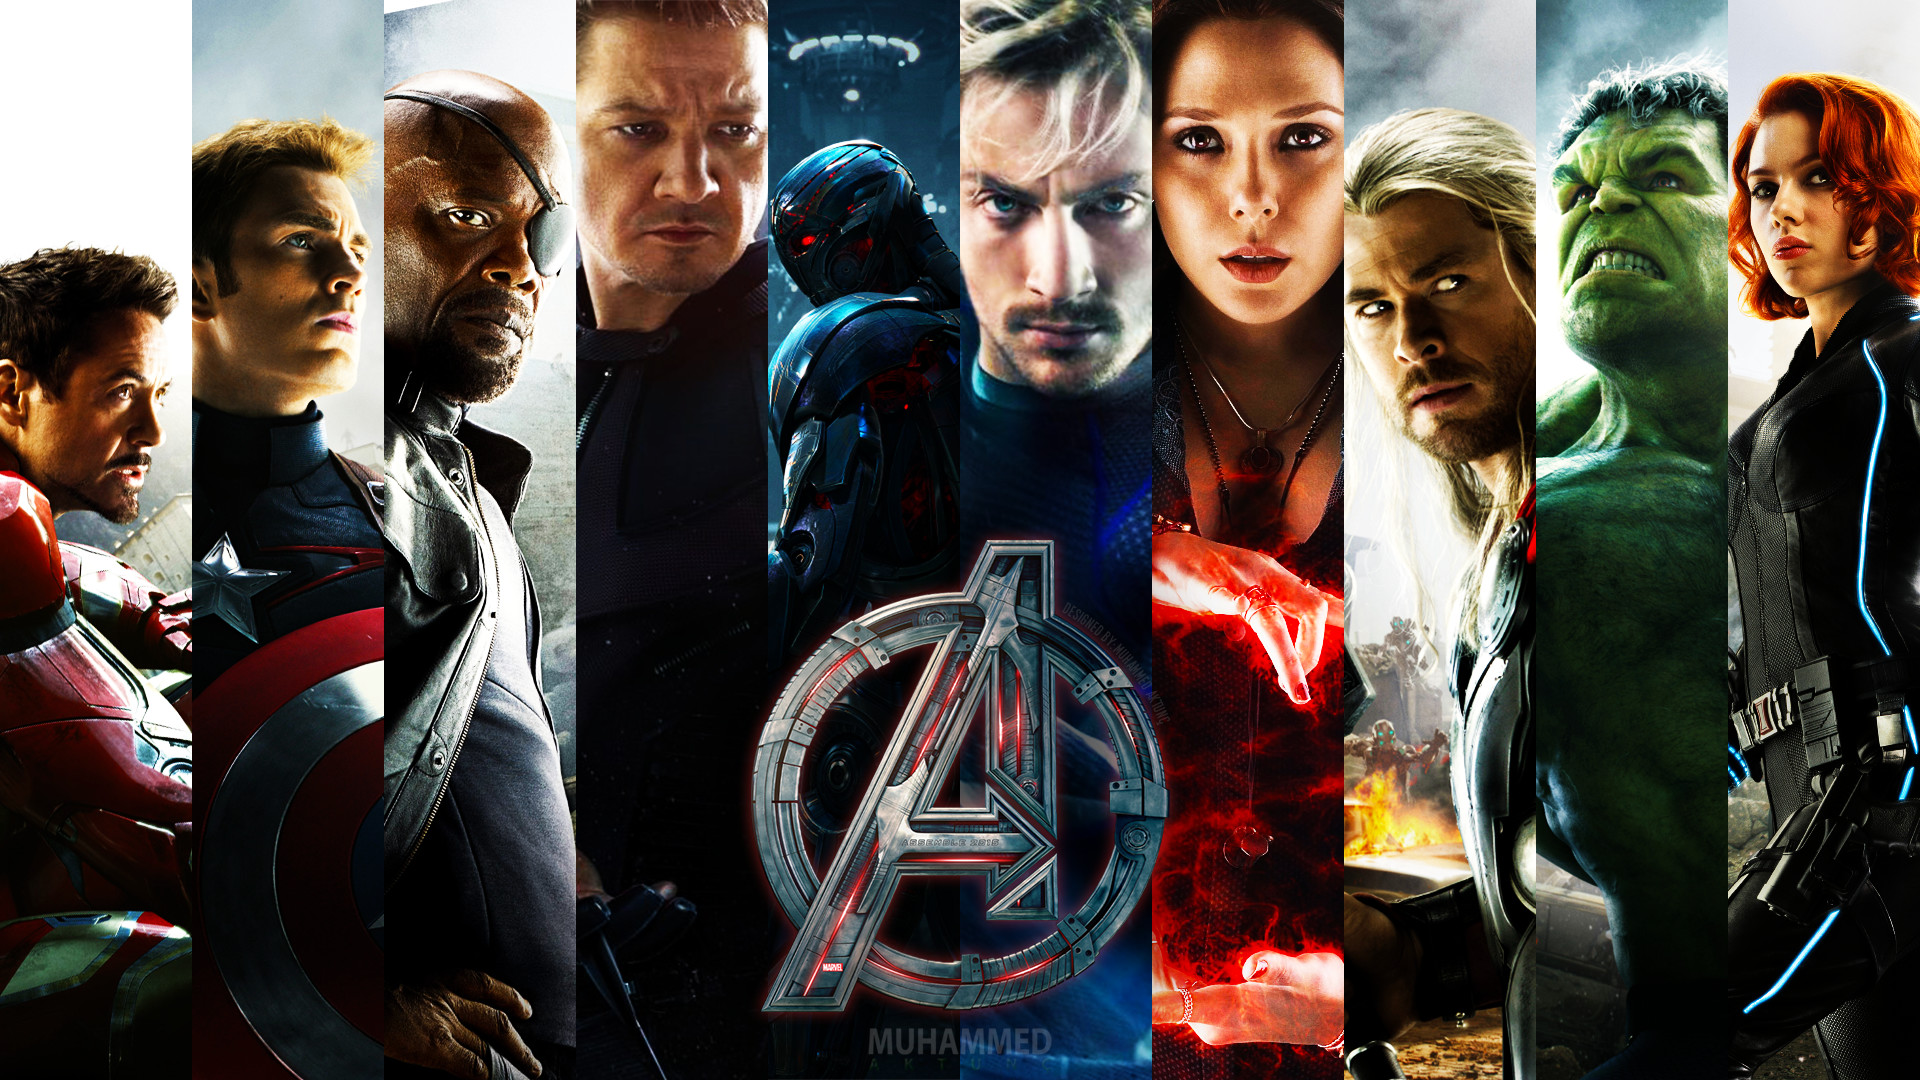 Download Wallpaper Avengers age of ultron, Marvel Download Wallpaper Pinterest Avengers wallpaper, Wallpaper and Wallpaper downloads